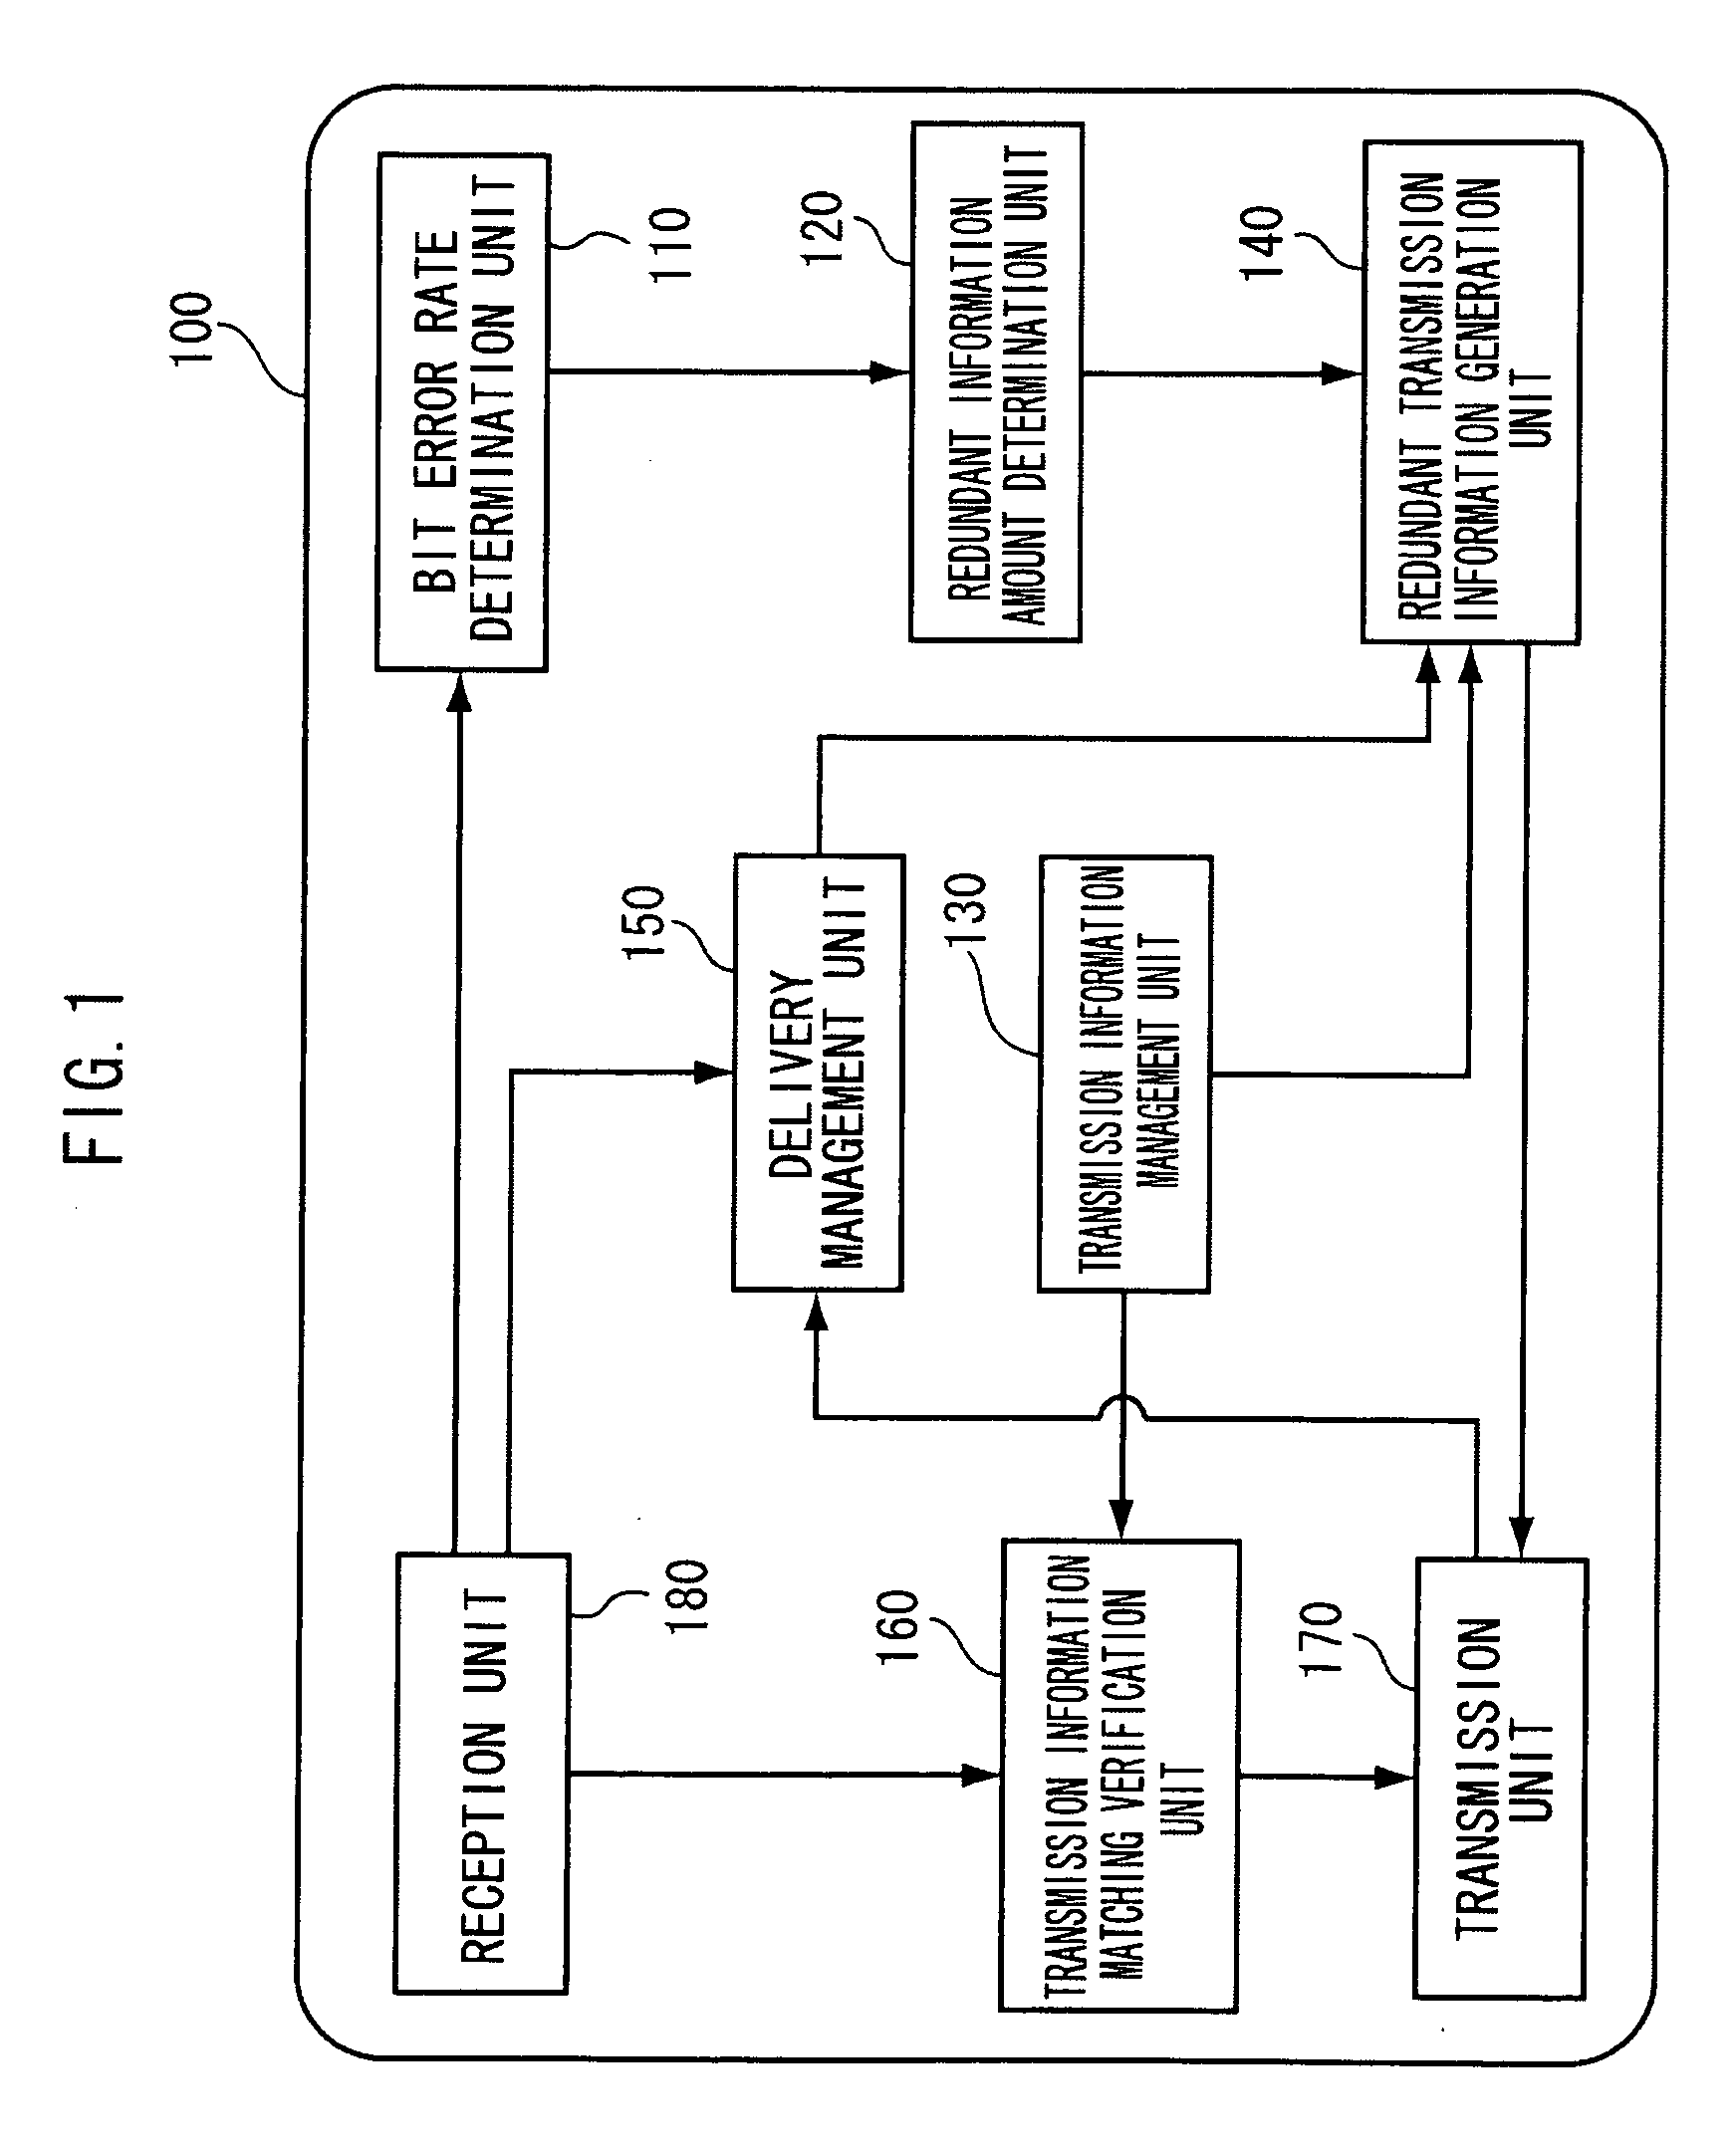 Transmission terminal, reception terminal, and information distribution system